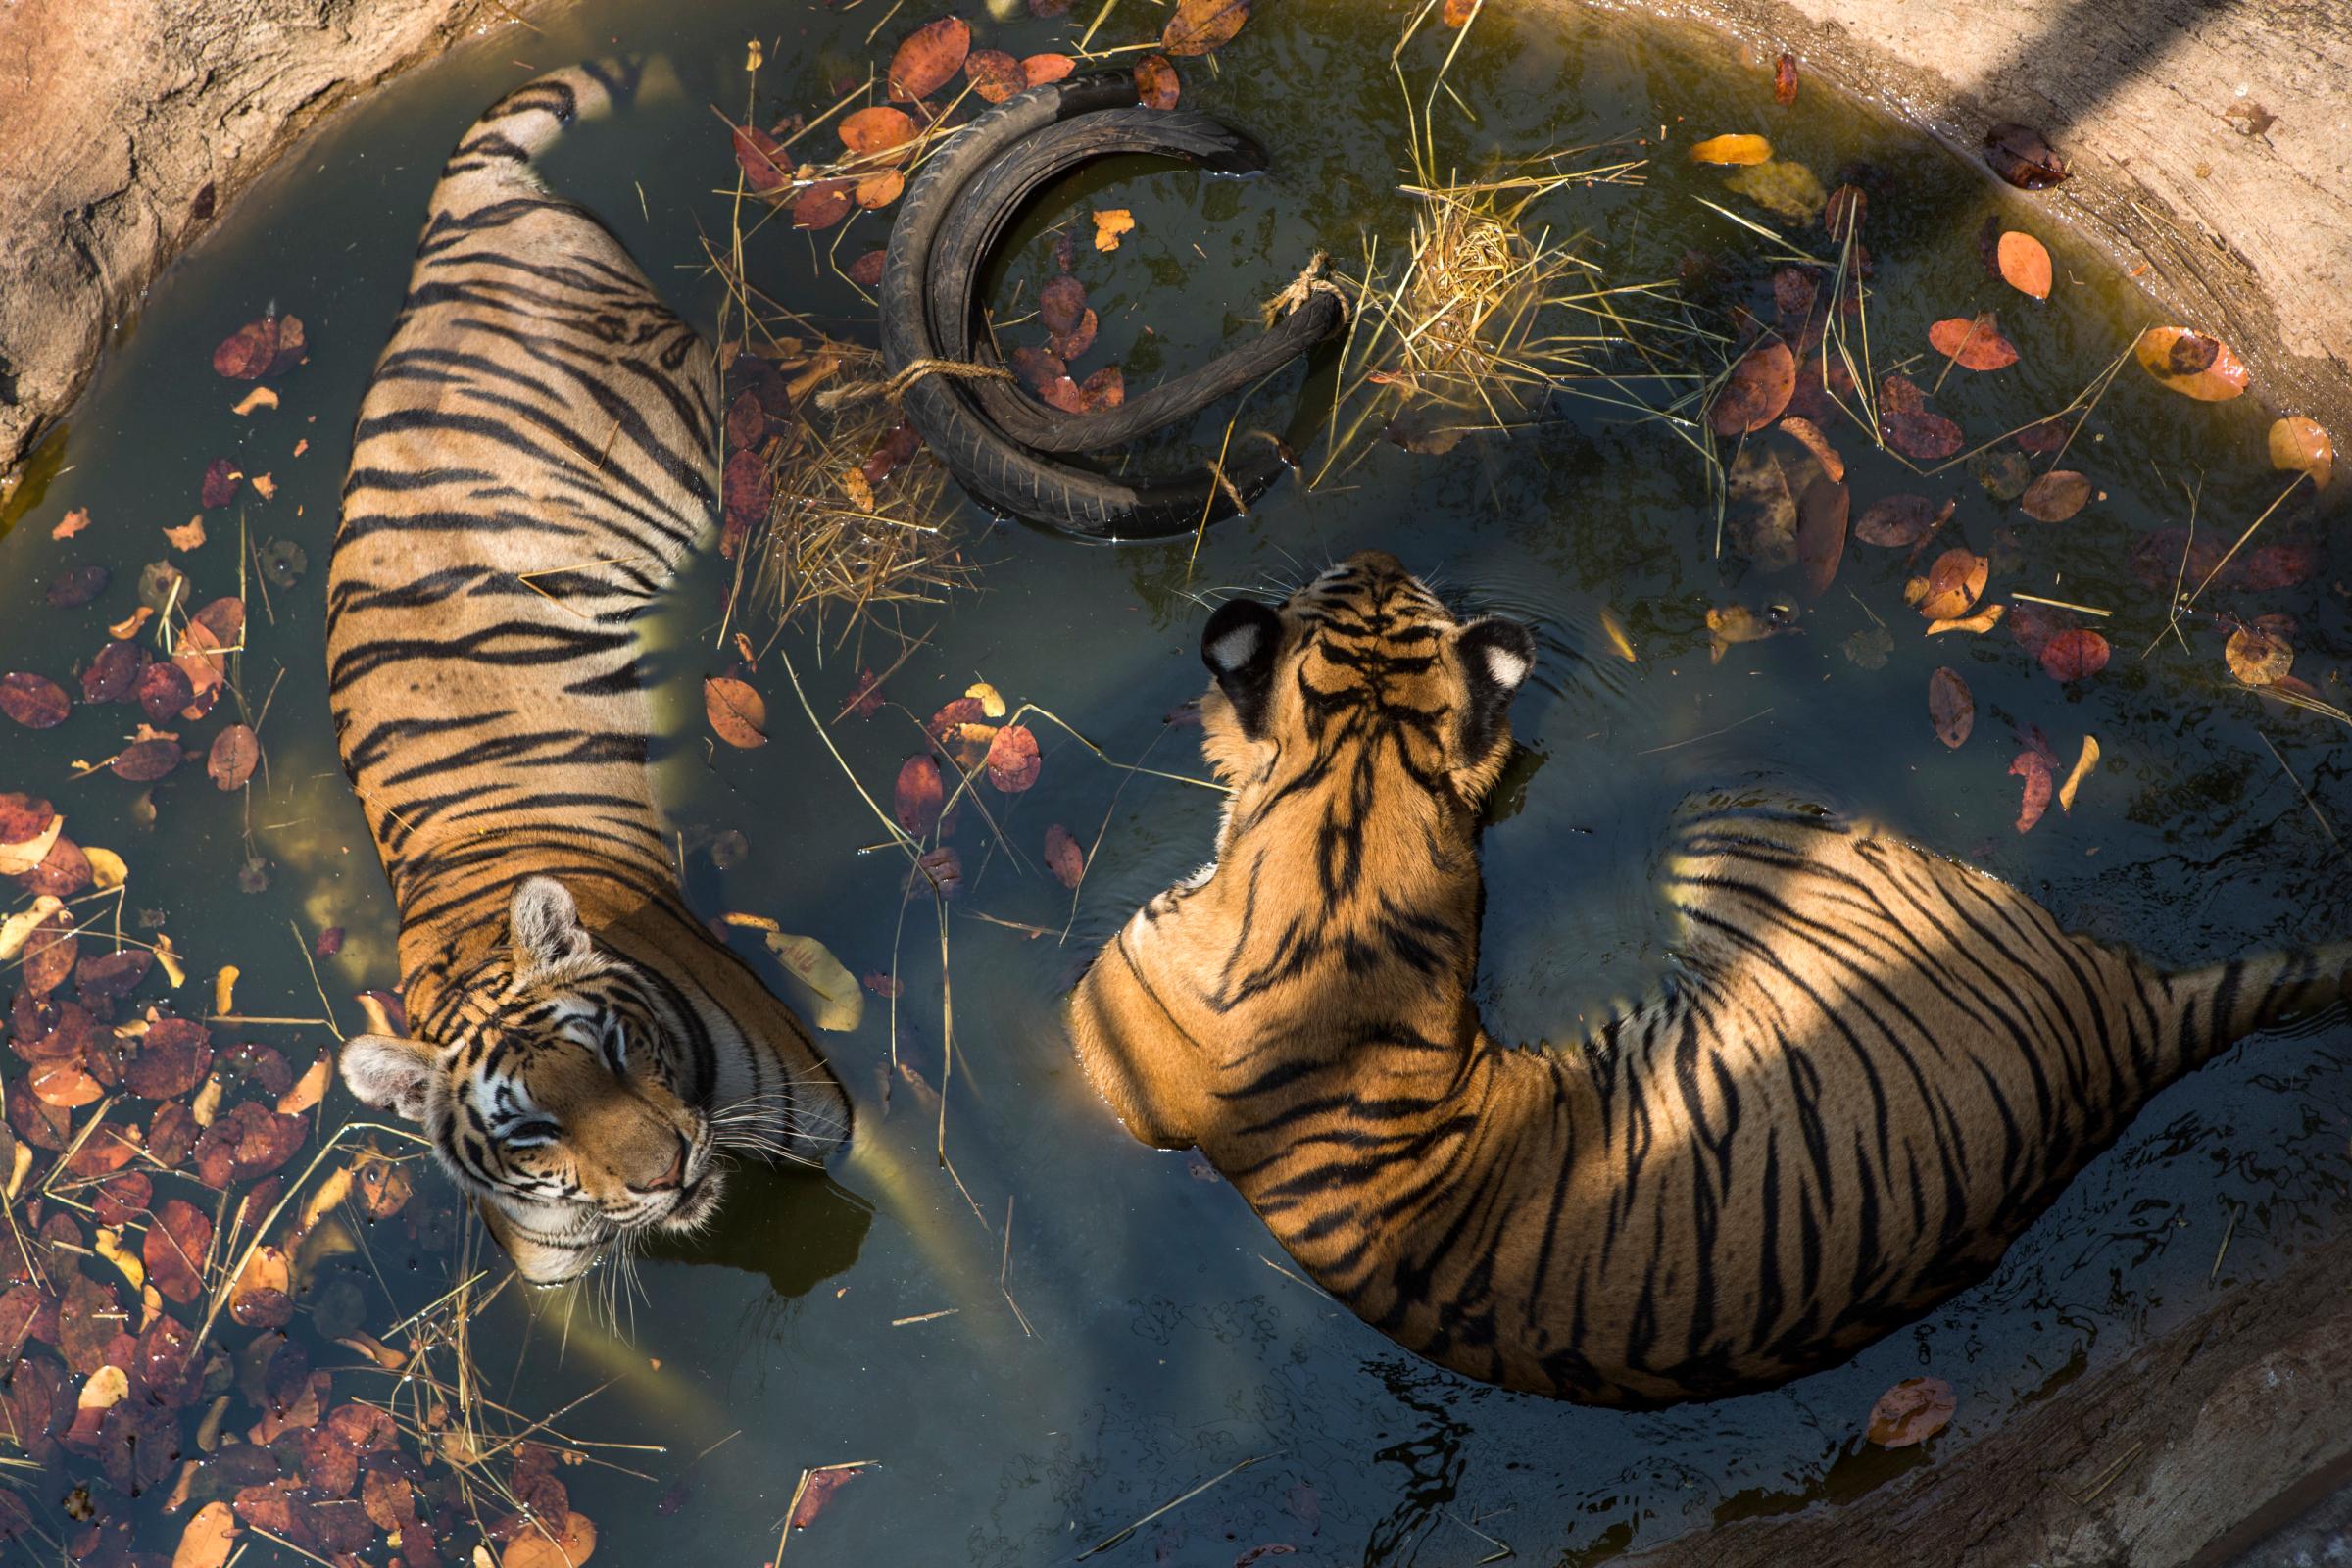 A pair of tigers soak in a shallow pool at Tiger Temple, a Buddhist monastery where paying visitors can interact with young adult tigers, in Kanchanaburi, Thailand, on March 16, 2016.